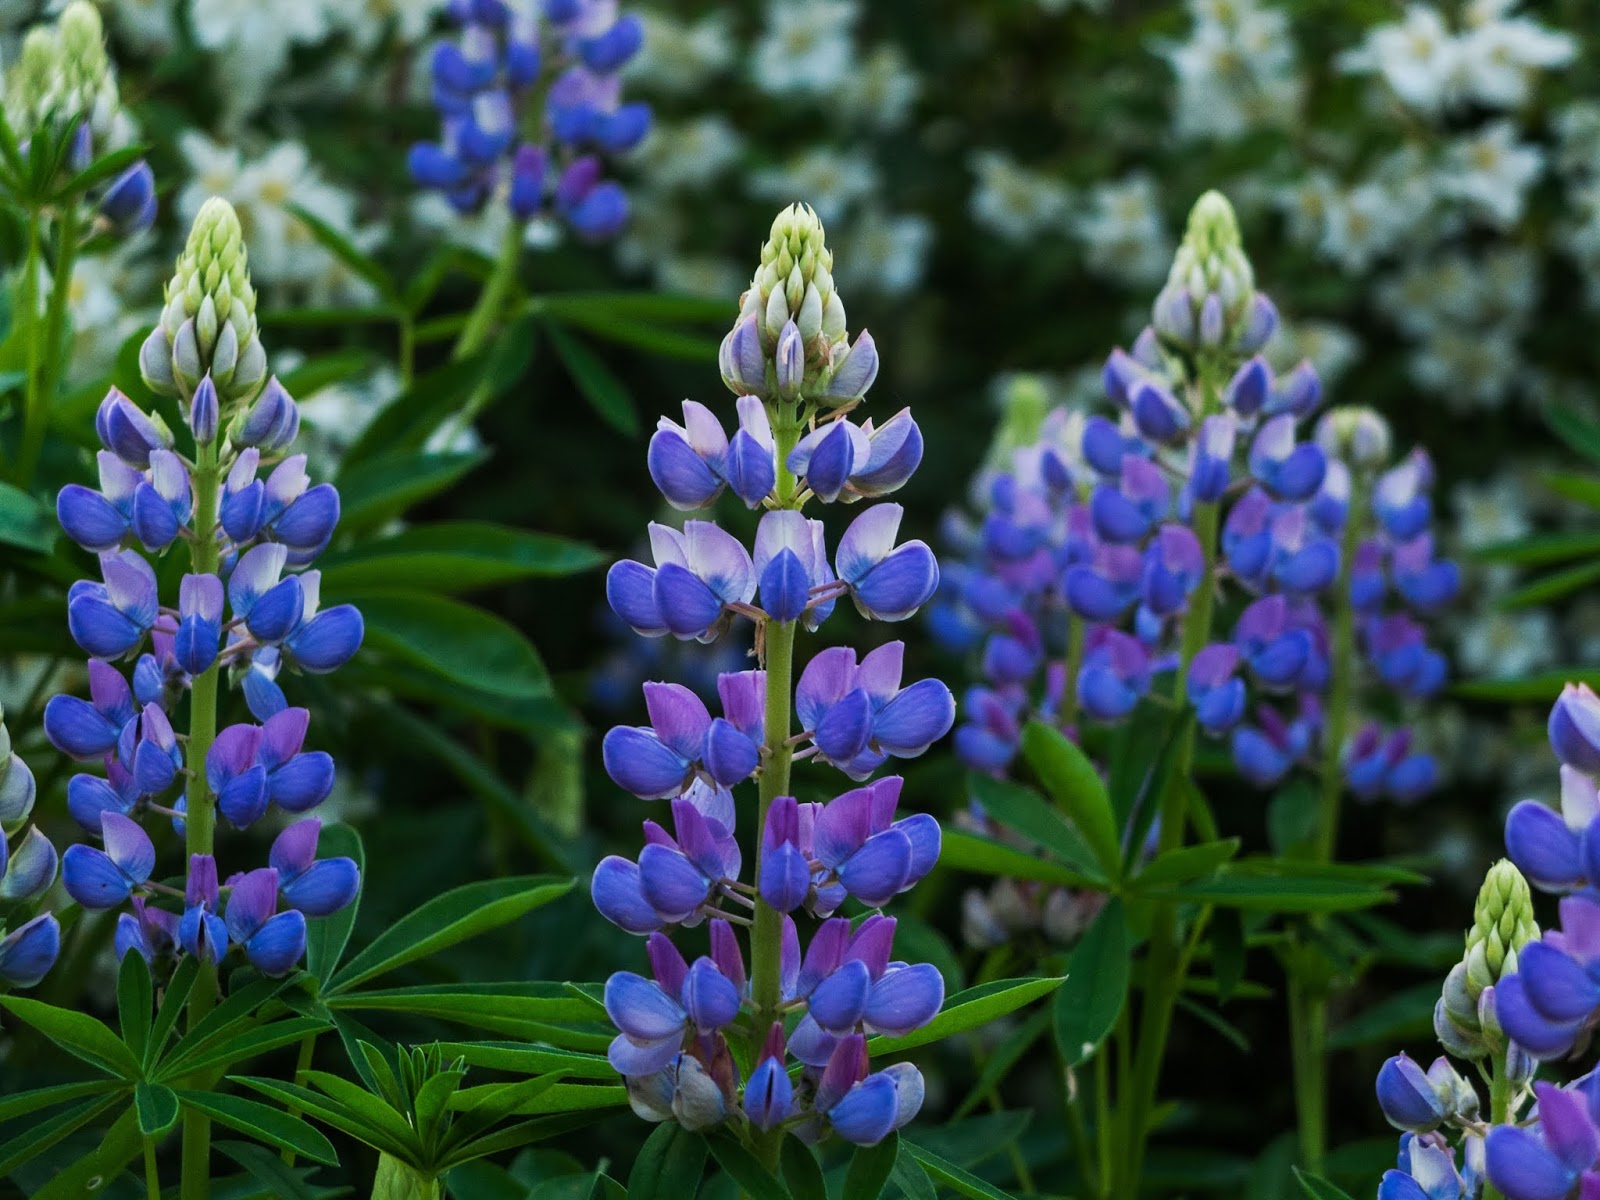 Purple lupine flowers captured at plant level.